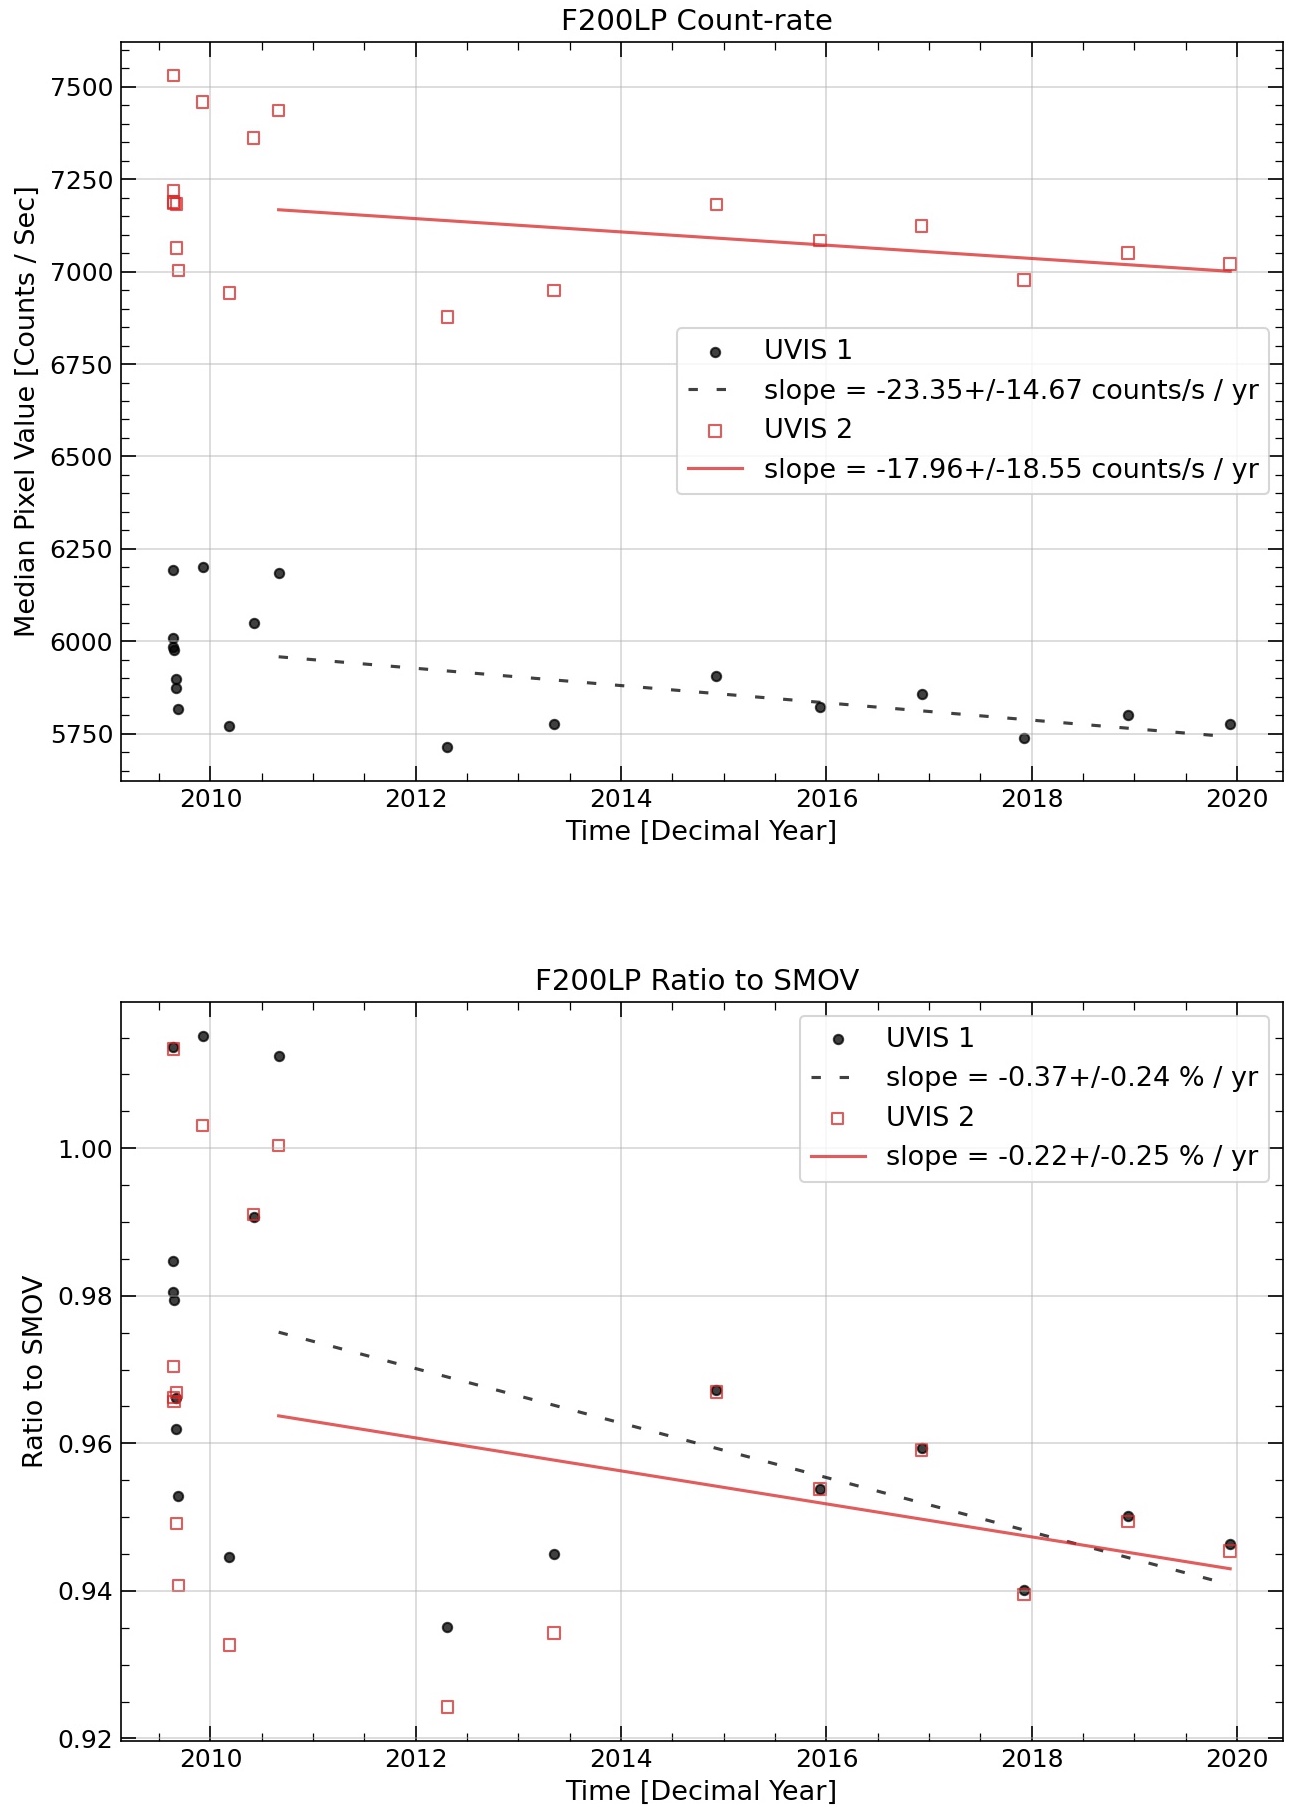 Caption for 2x1 scatter plots: The top panel shows the count-rate evolution for internal deuterium lamp flat-fields. The bottom panel shows the count-rate evolution normalized to the SMOV reference flat-field. In both panels UVIS1 is plotted as black circles and UVIS2 is plotted as open red squares. A linear least squares regression was fit to the UVIS1 and UVIS2 data separately and their slopes with standard errors are given in the legends.